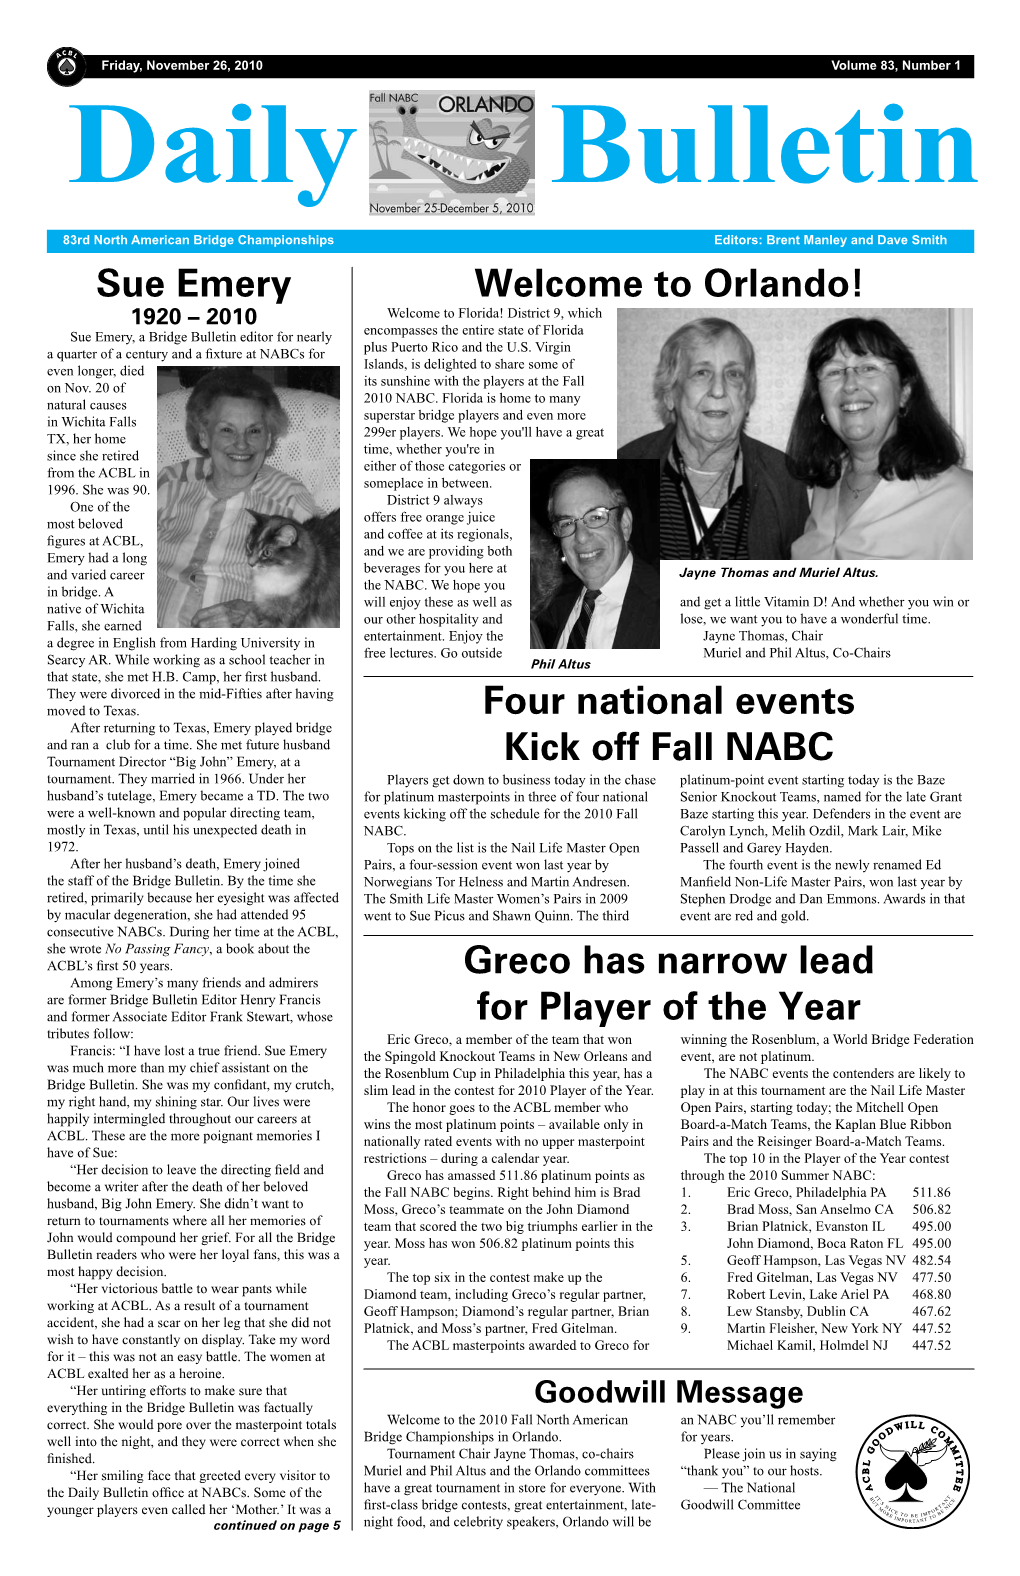 Sue Emery Greco Has Narrow Lead for Player of the Year Four National Events Kick Off Fall NABC Welcome to Orlando!